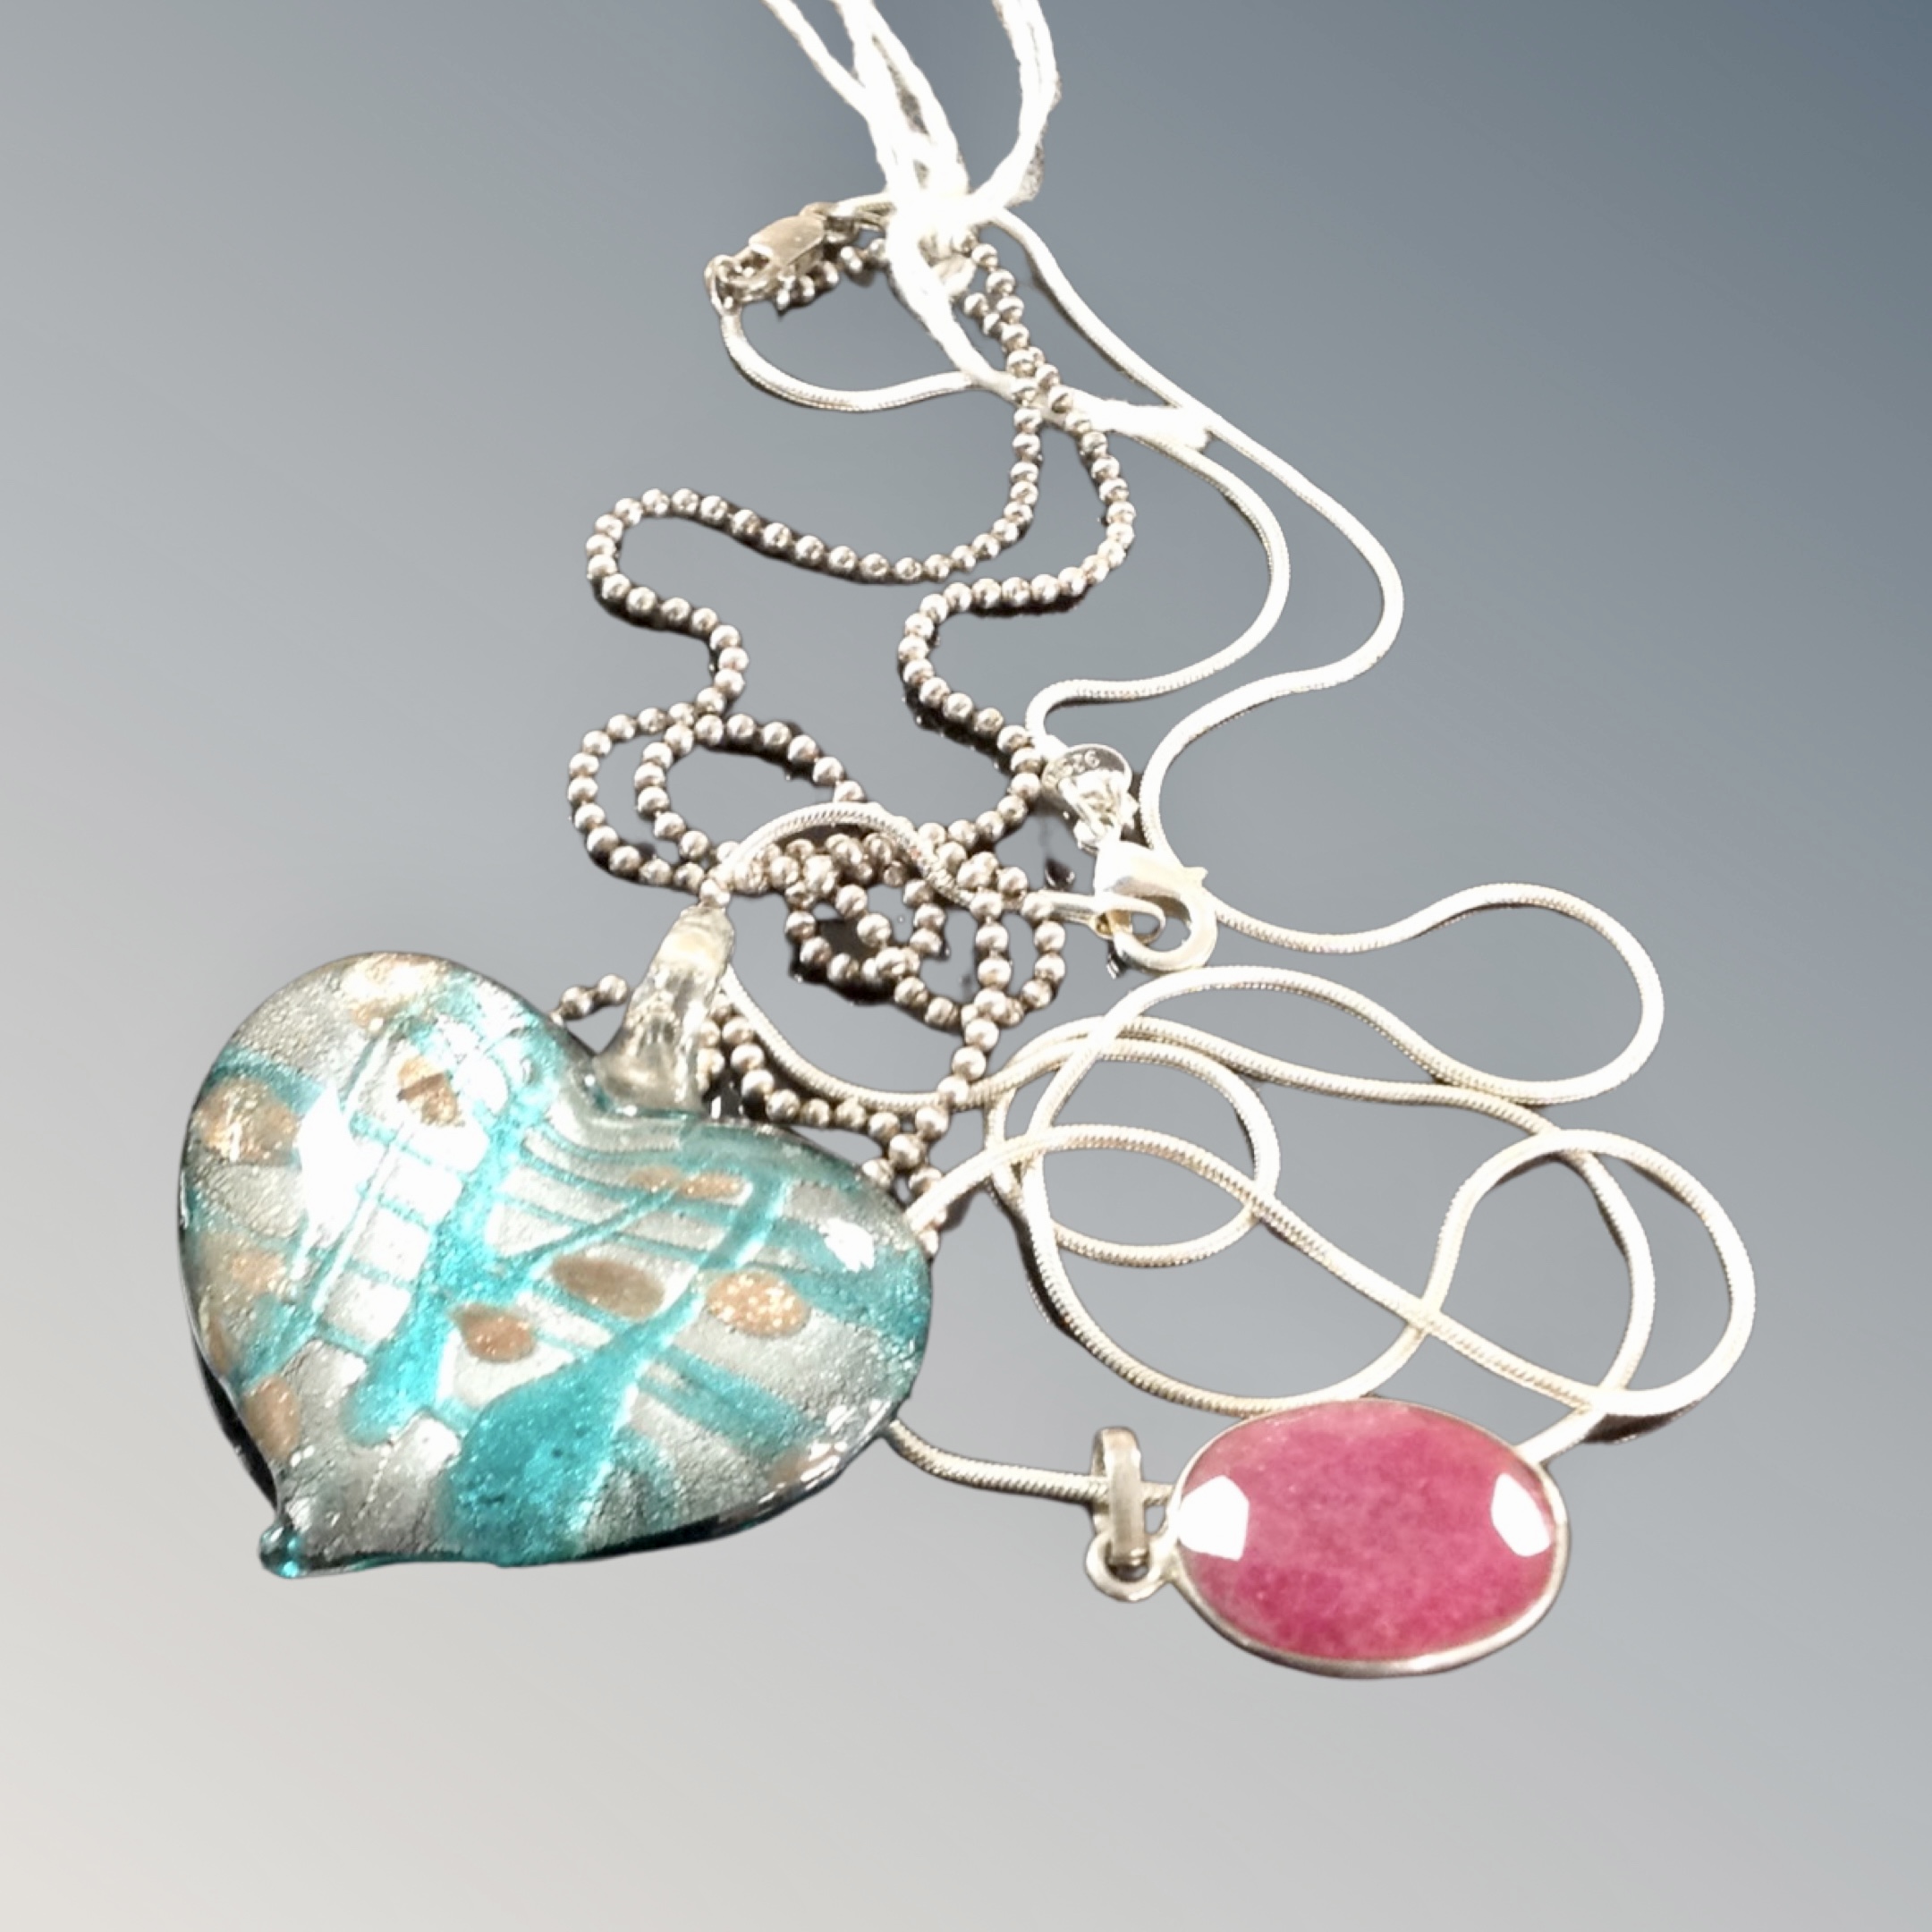 A Murano glass heart pendant on marked beaded silver together with a sterling silver snake chain